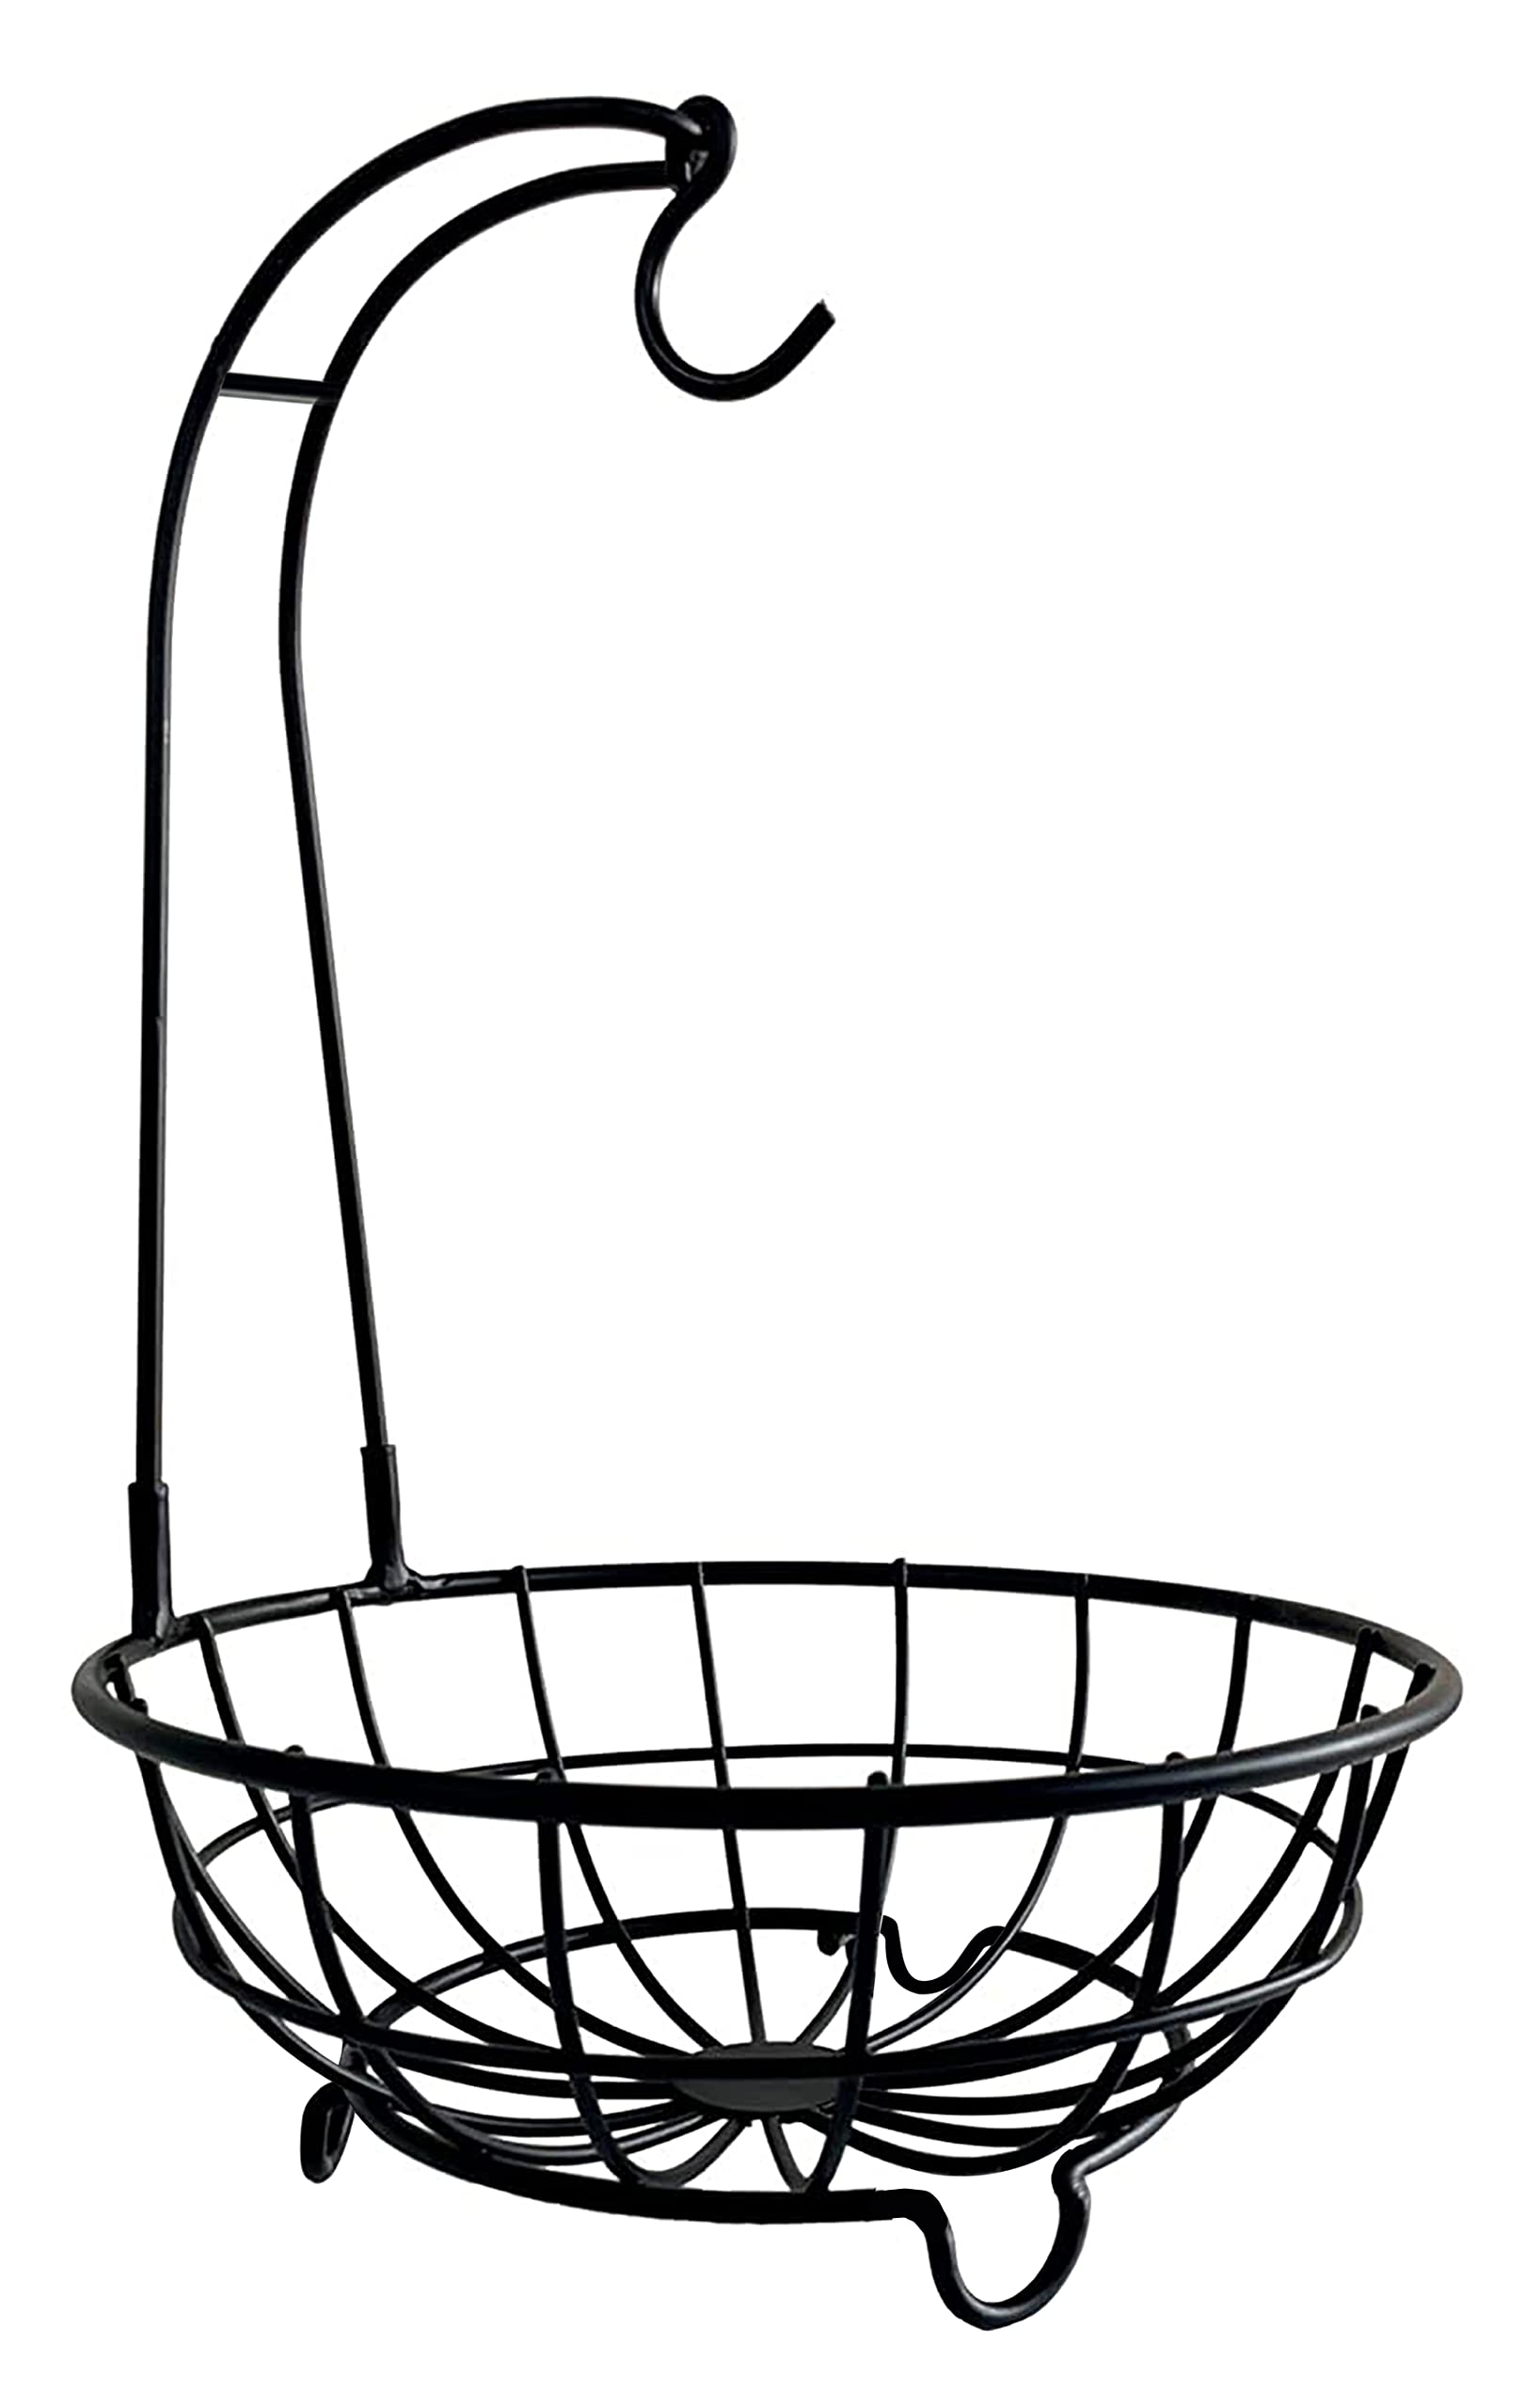 Plantex Heavy Steel Fruit & Vegetable Basket Bowl with Removable Banana Hanger for Dining Table/Kitchen - Countertop (Black)